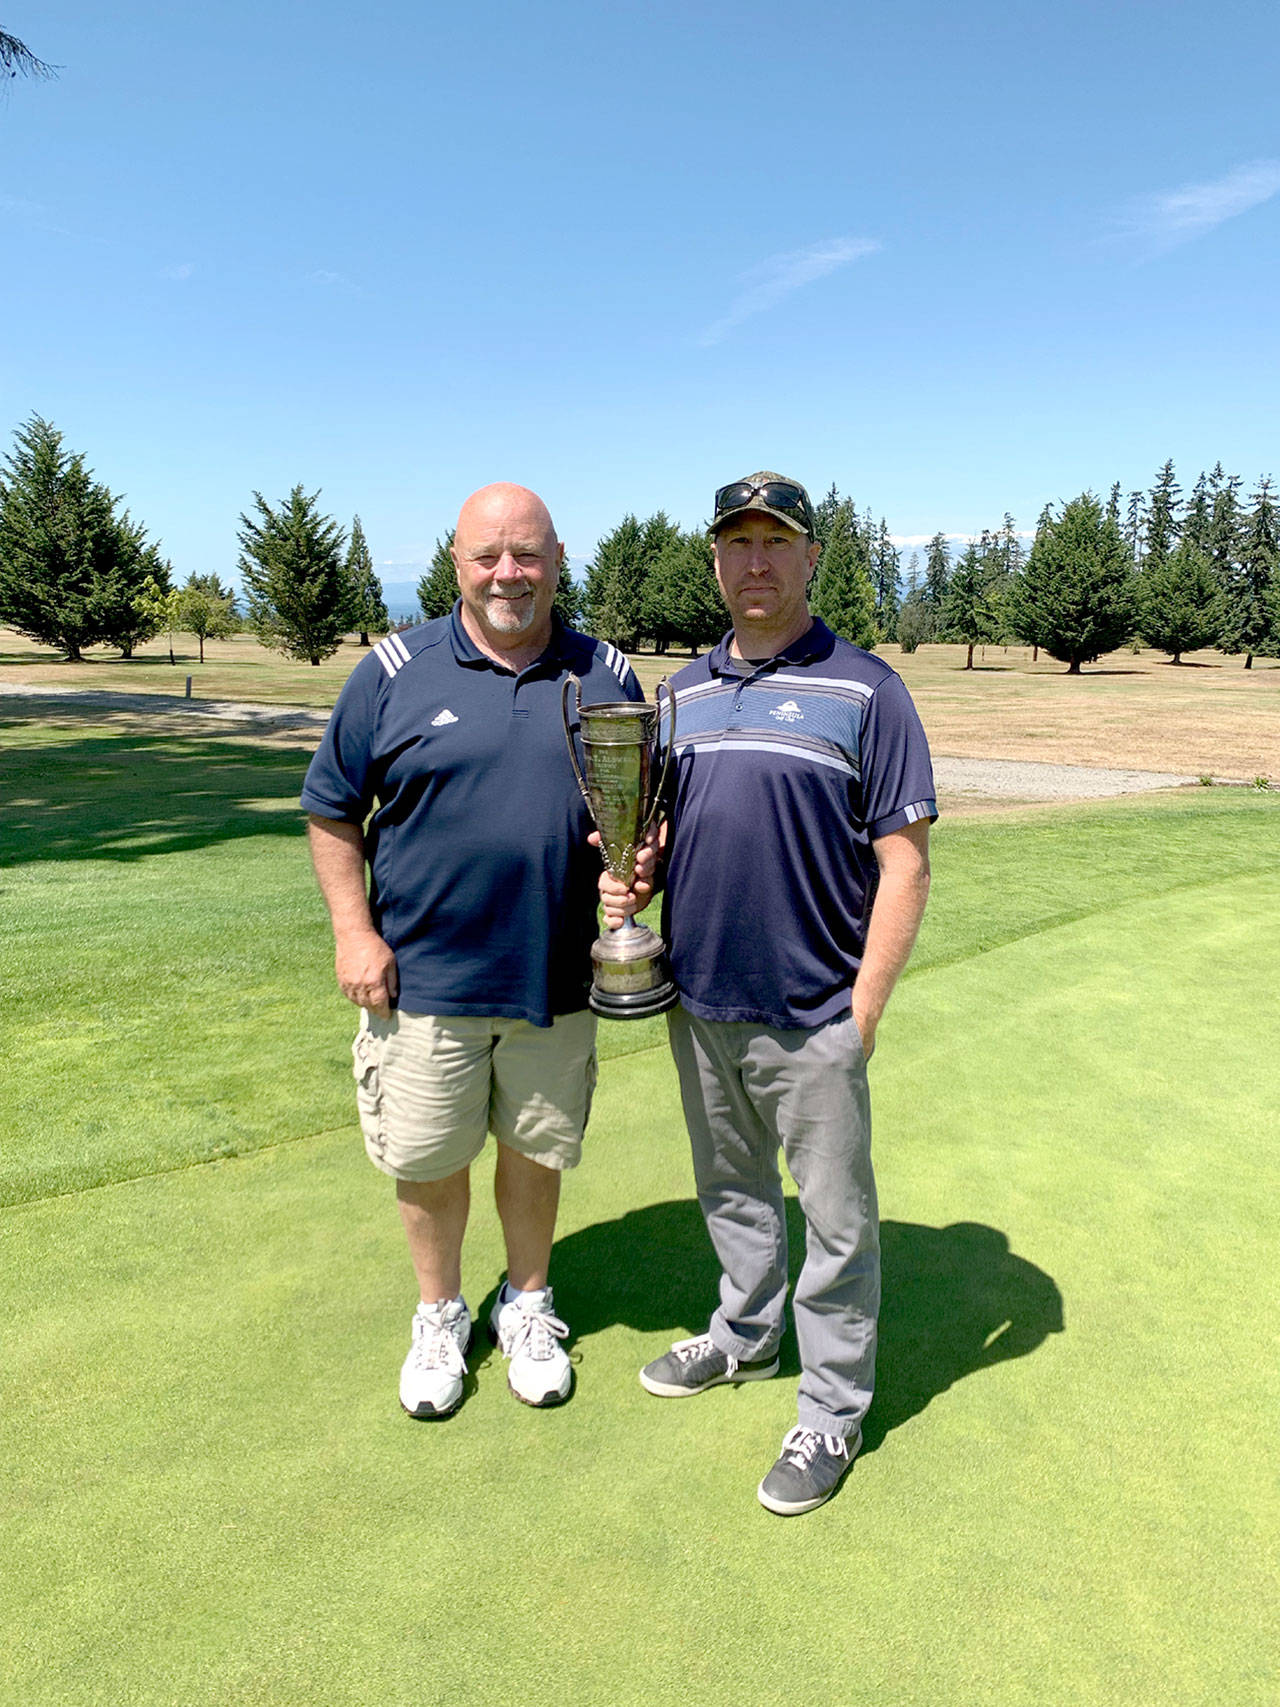 Peninsula Golf Club recently held its annual Men’s Club Championship and Paul Reed, left, and Mark Mast, won the Gross and Net championships, respectively and will share the Thomas T. Aldwell Trophy. It was the 12th club championship for Reed, the first for Mast.